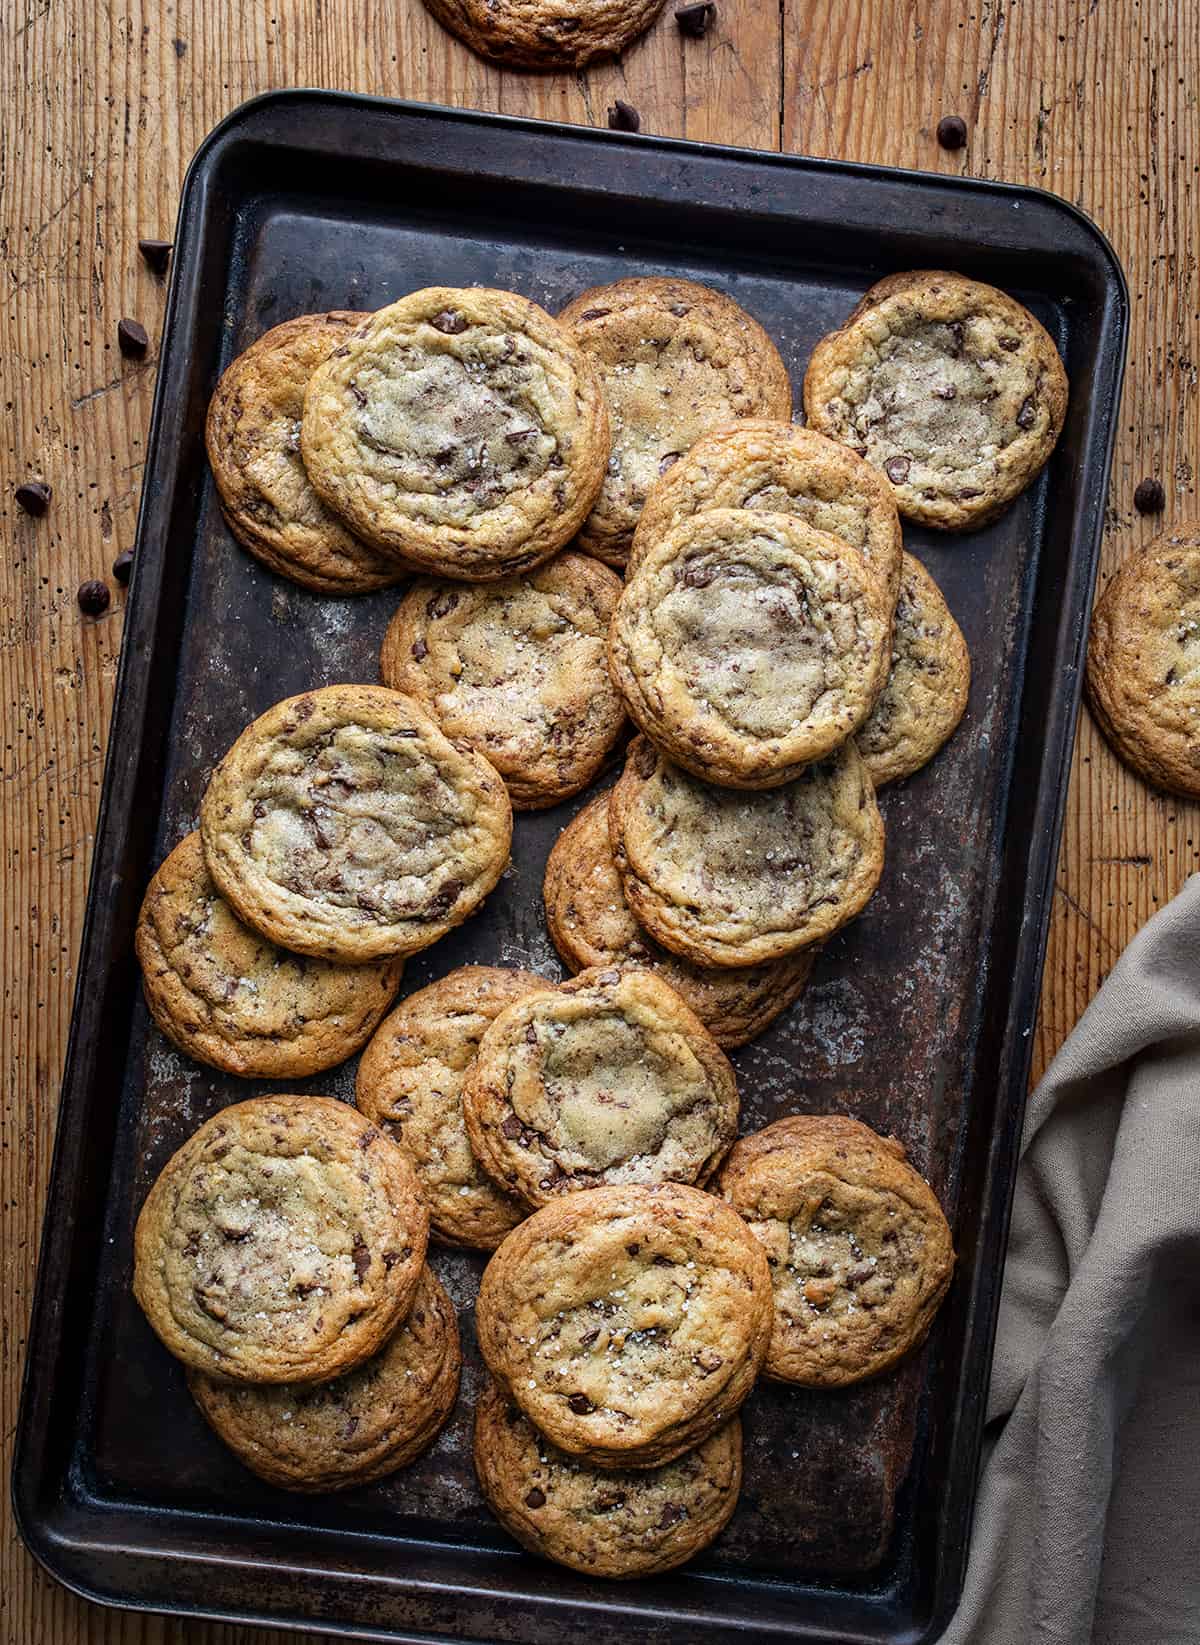 Sheet Pan Covered in Browned Butter Chocolate Chip Cookies on a Table from Overhead. 